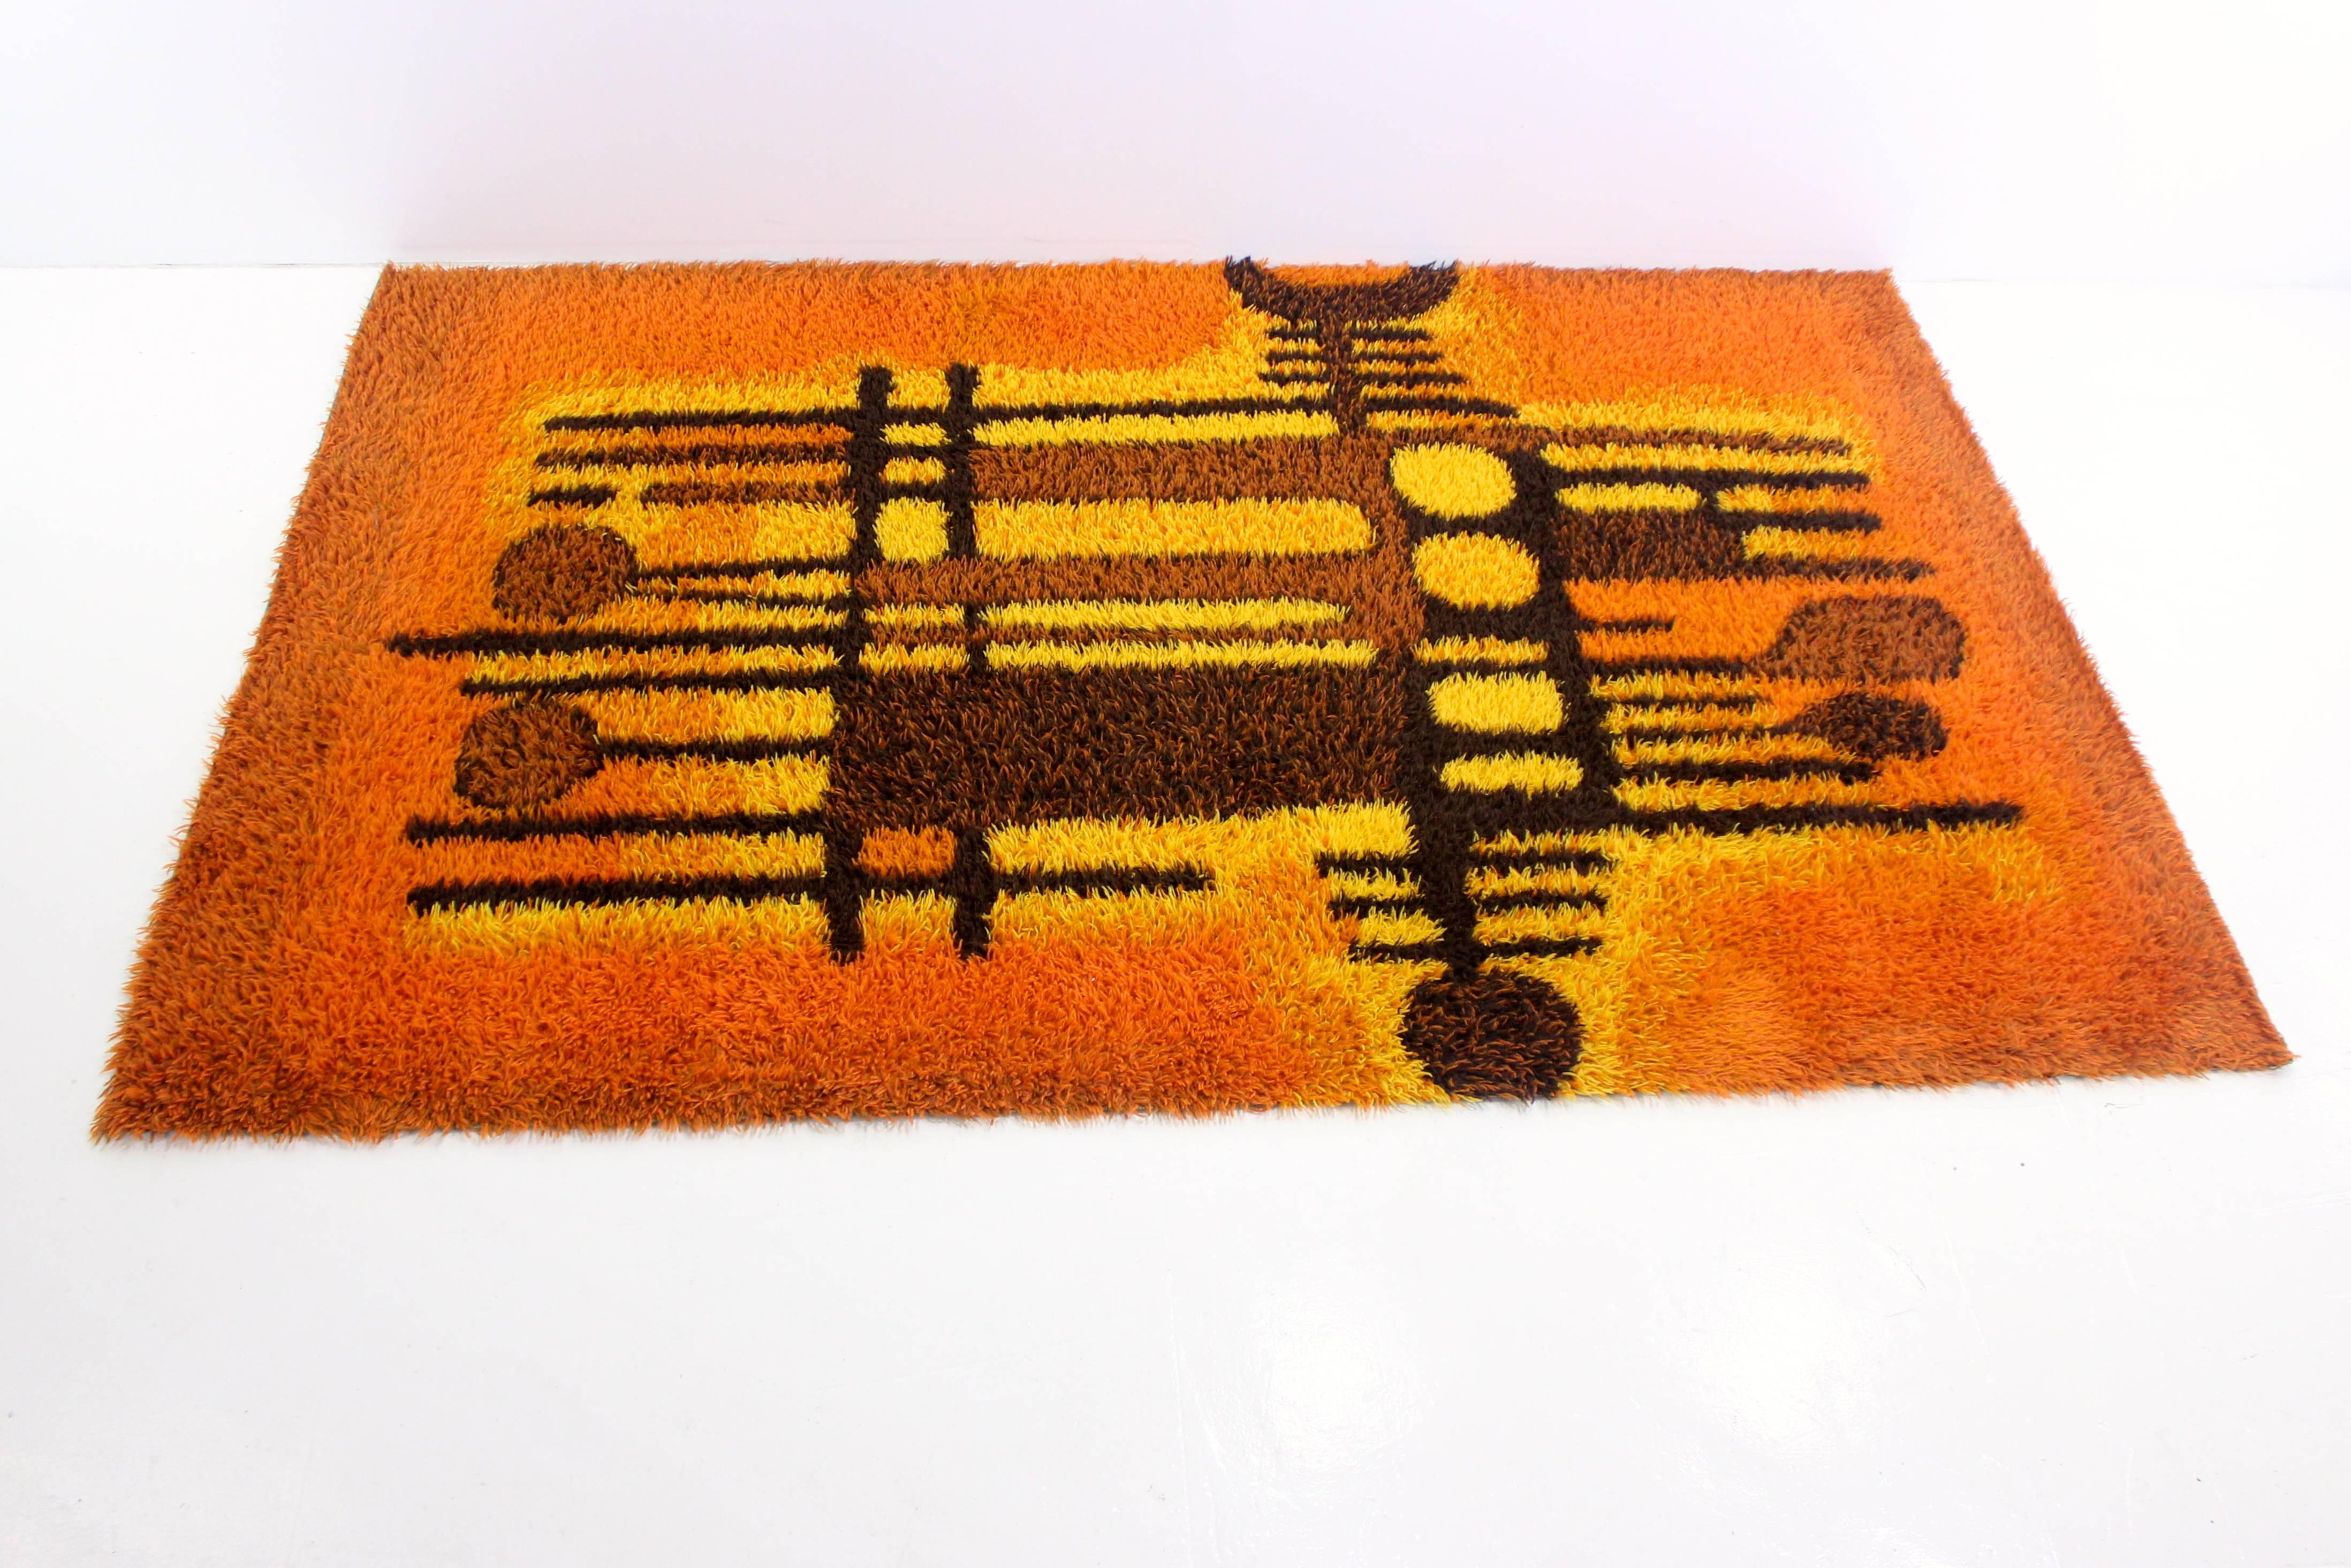 Danish modern Rya rug.
100% wool.
Rich browns create geometric pattern silhouetted against a radiant, glowing, graded yellow and orange field.
Matchless quality and price.
Low freight and quick ship.